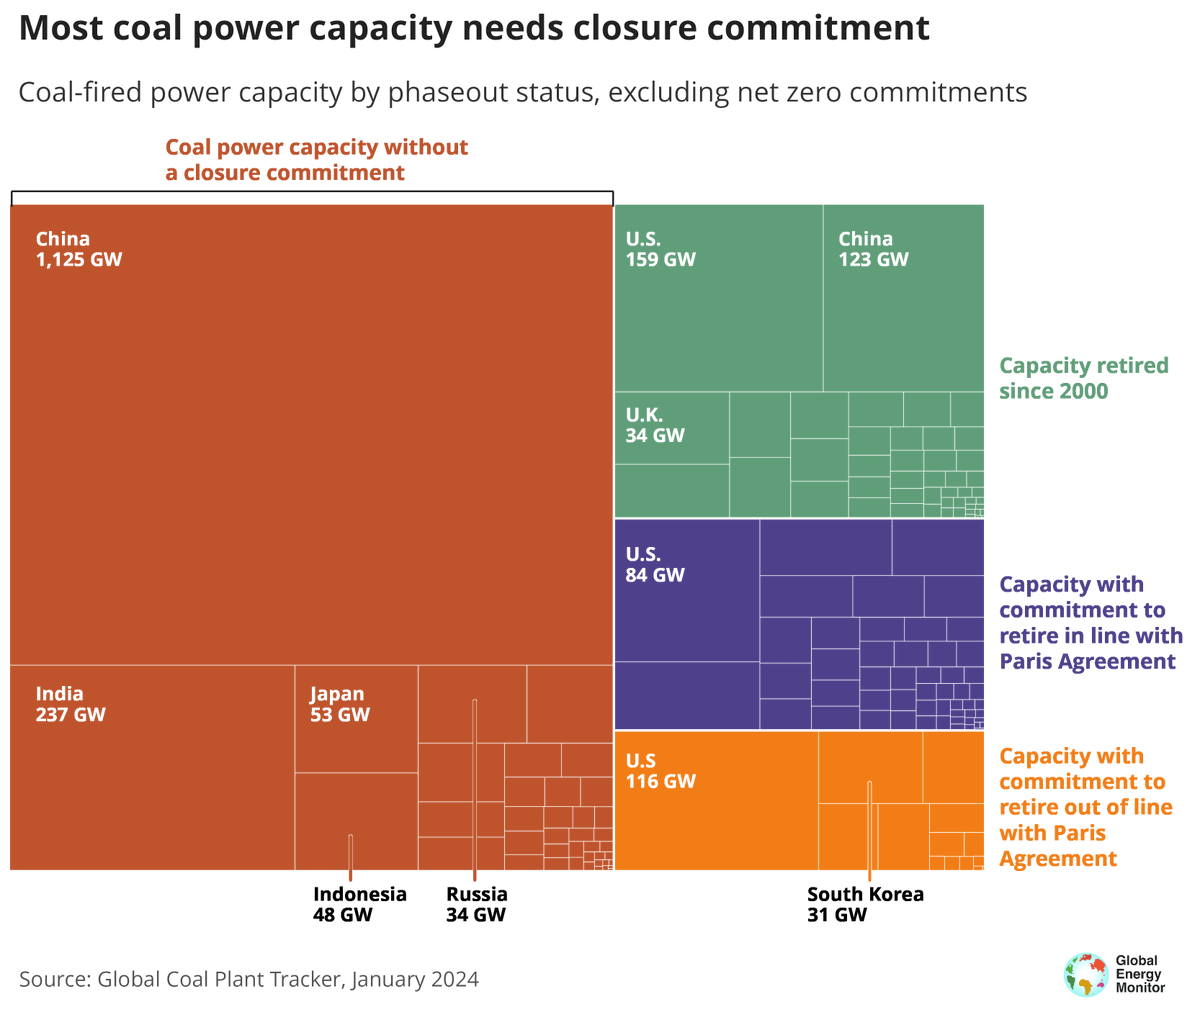 Over HALF of countries with coal power have reduced or maintained operating capacity since the Paris Agreement. Yet 75% (1,626 GW) still lack a #coal closure commitment, risking global climate goals. Learn more in the latest report from @GlobalEnergyMon: globalenergymonitor.org/report/boom-an…